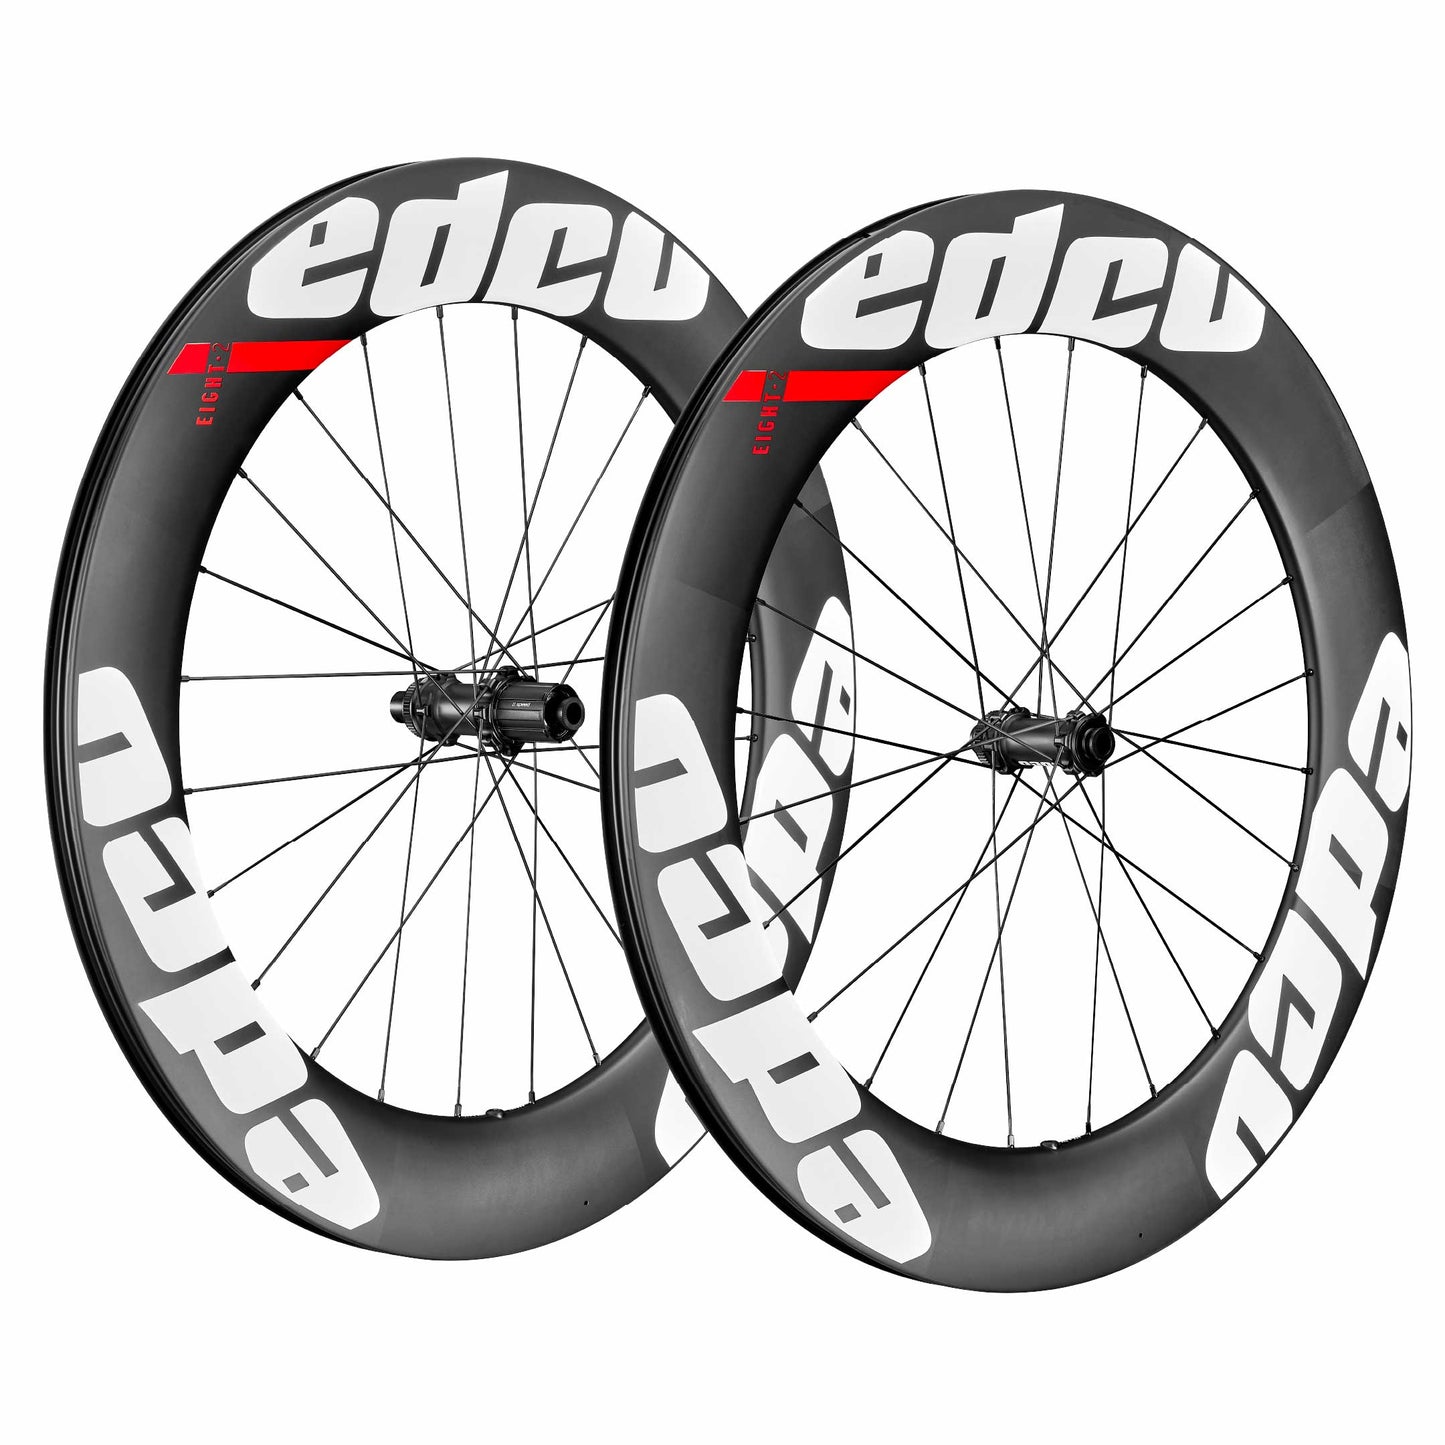 82mm deep carbon fibre wheelset with red white logos